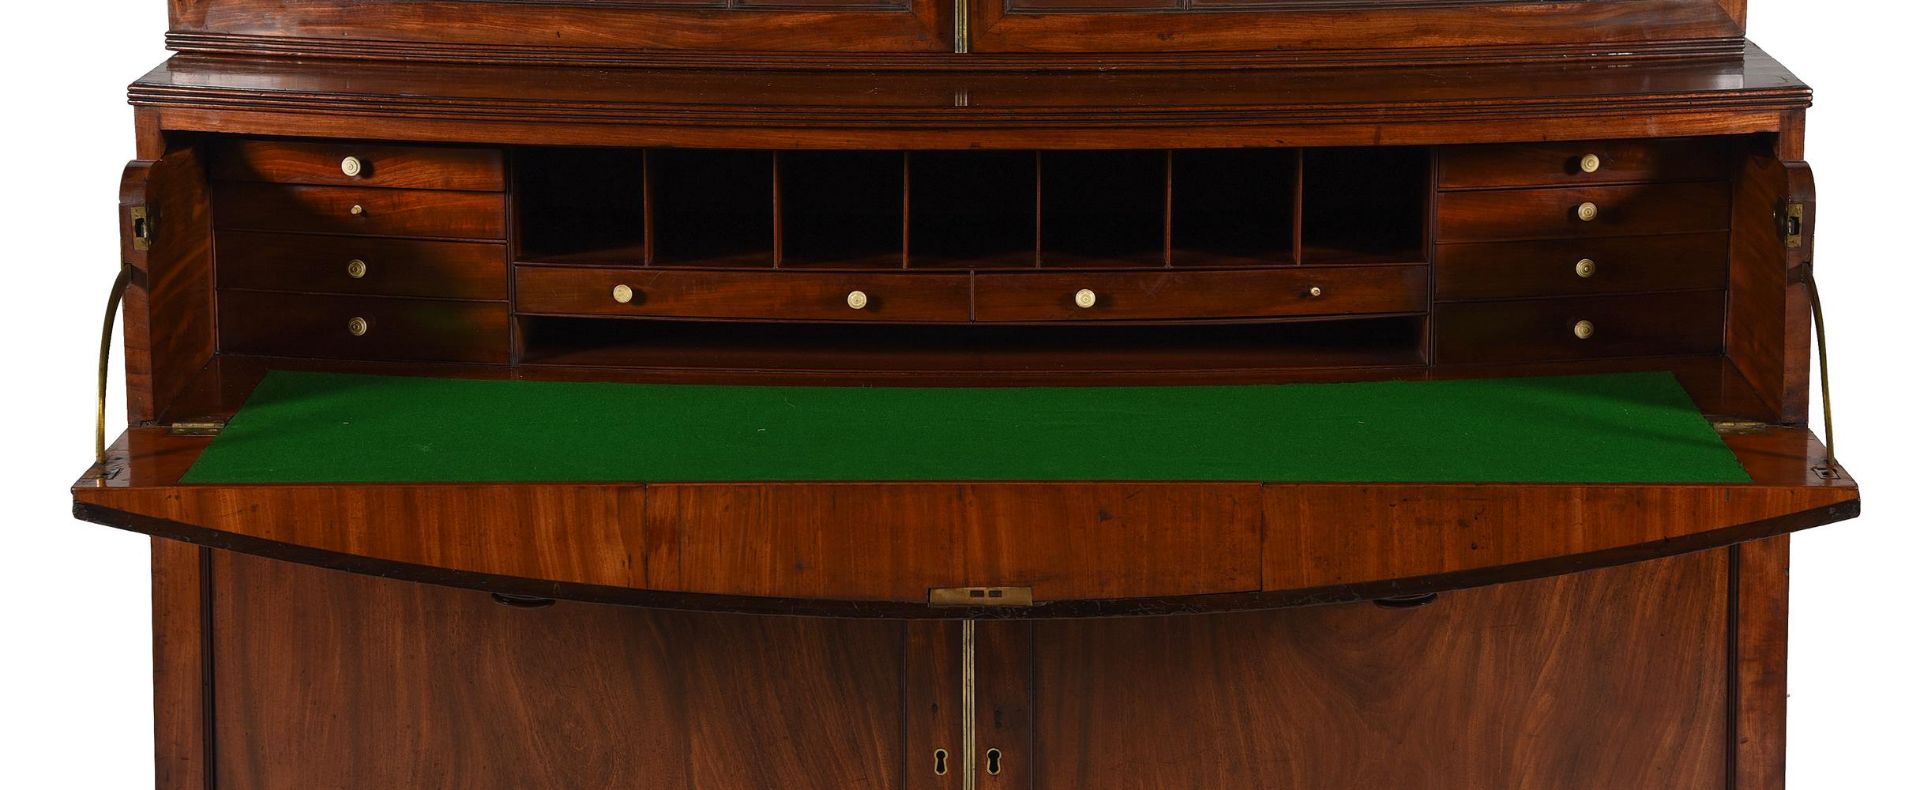 Y A REGENCY MAHOGANY BOWFRONT SECRETAIRE BOOKCASE, IN THE MANNER OF GILLOWS, CIRCA 1820 - Image 3 of 6